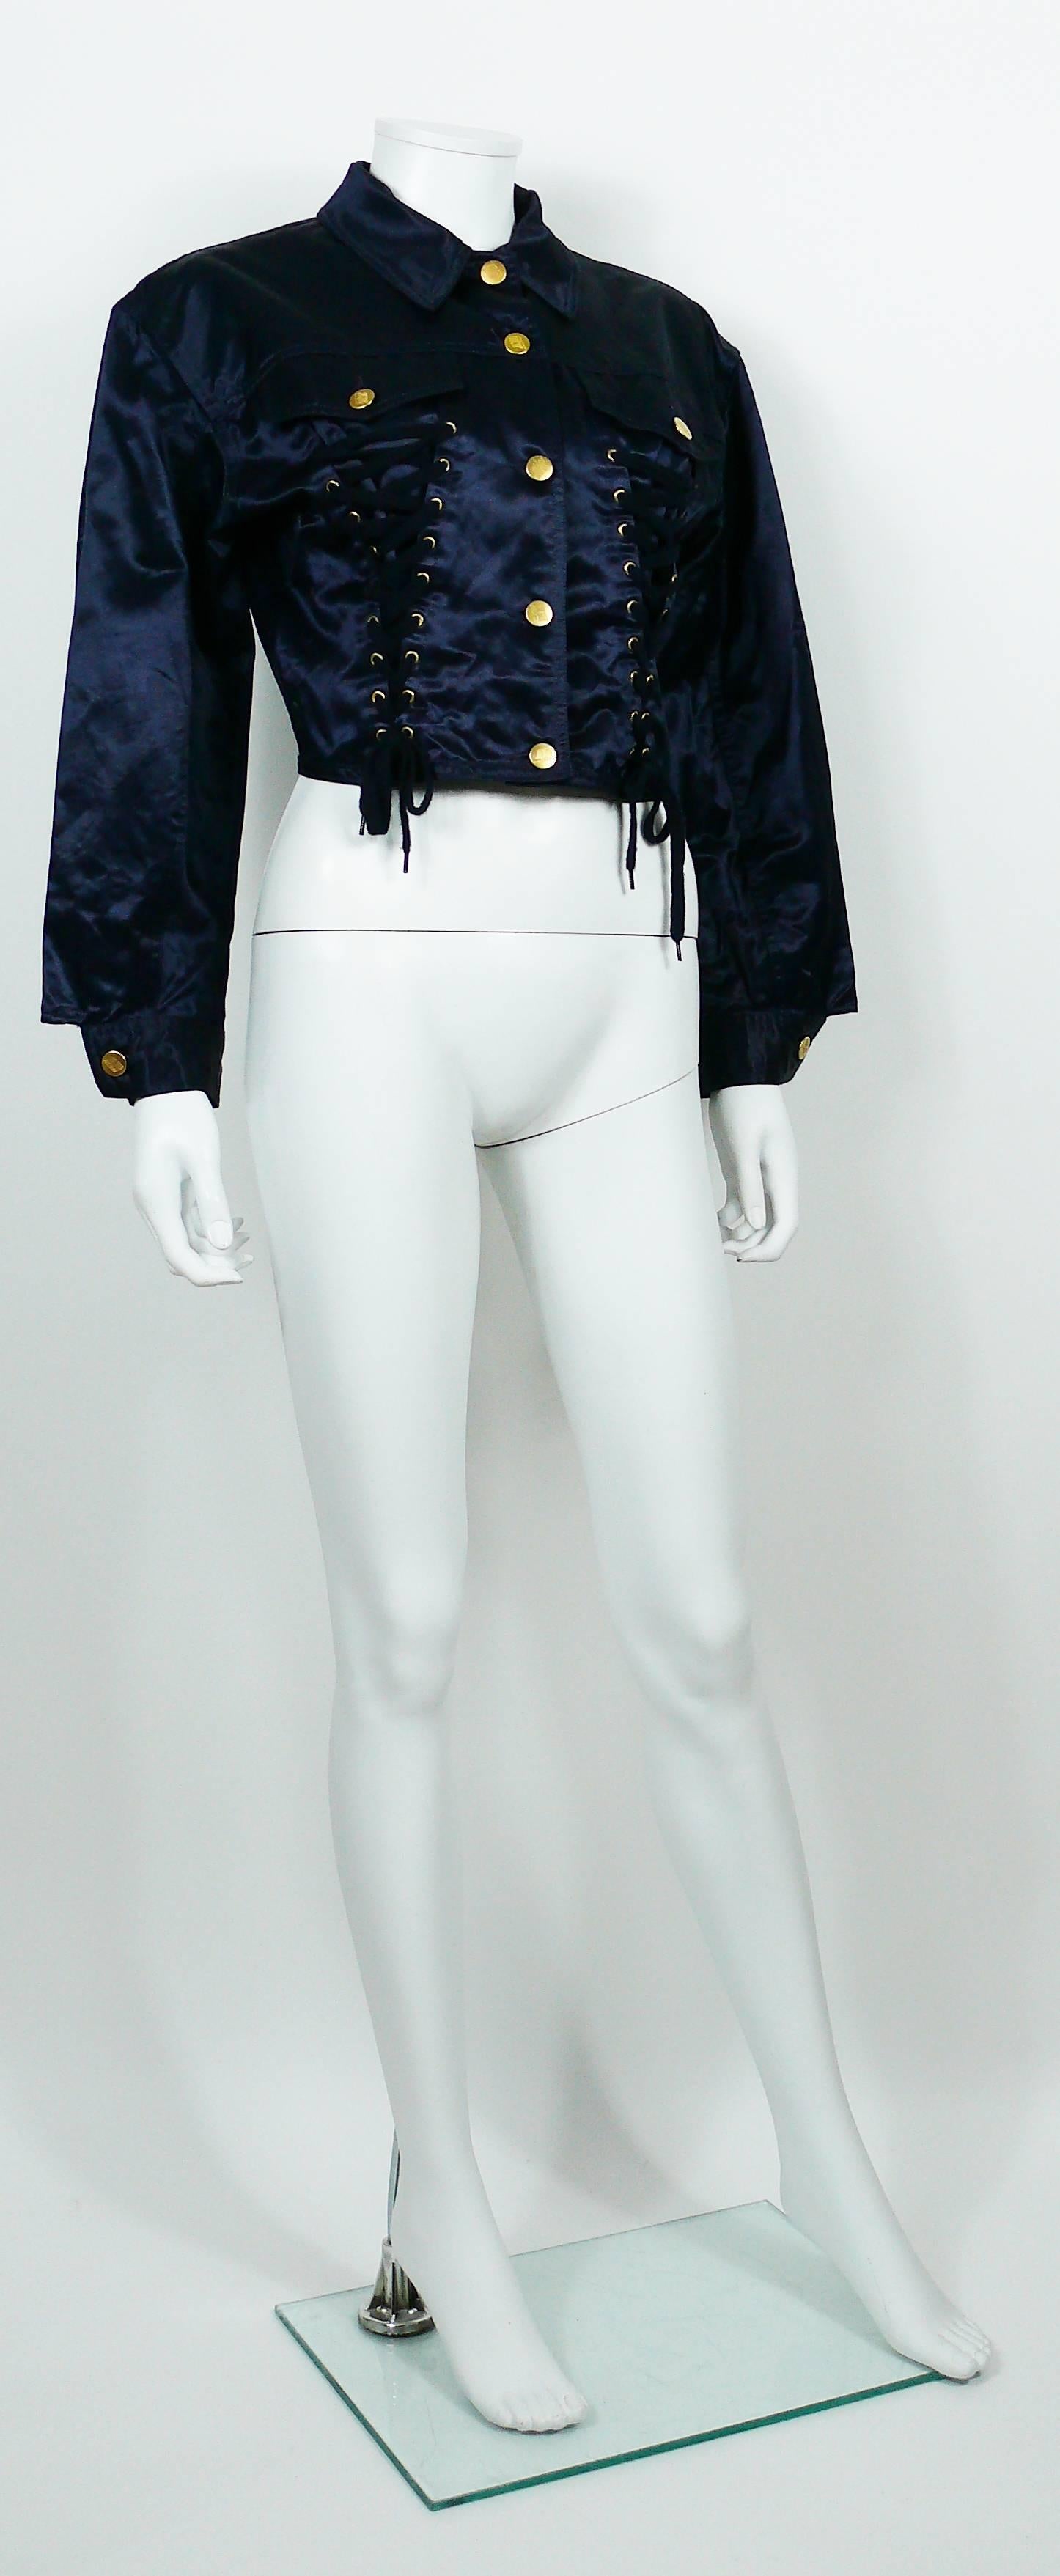 JEAN PAUL GAULTIER Junior vintage navy blue coated cotton iconic corset style jacket.

This jacket features classic collar, front button fastening, front lace up detail, long sleeves with button cuffs and pocket detail at the chest.

Label reads